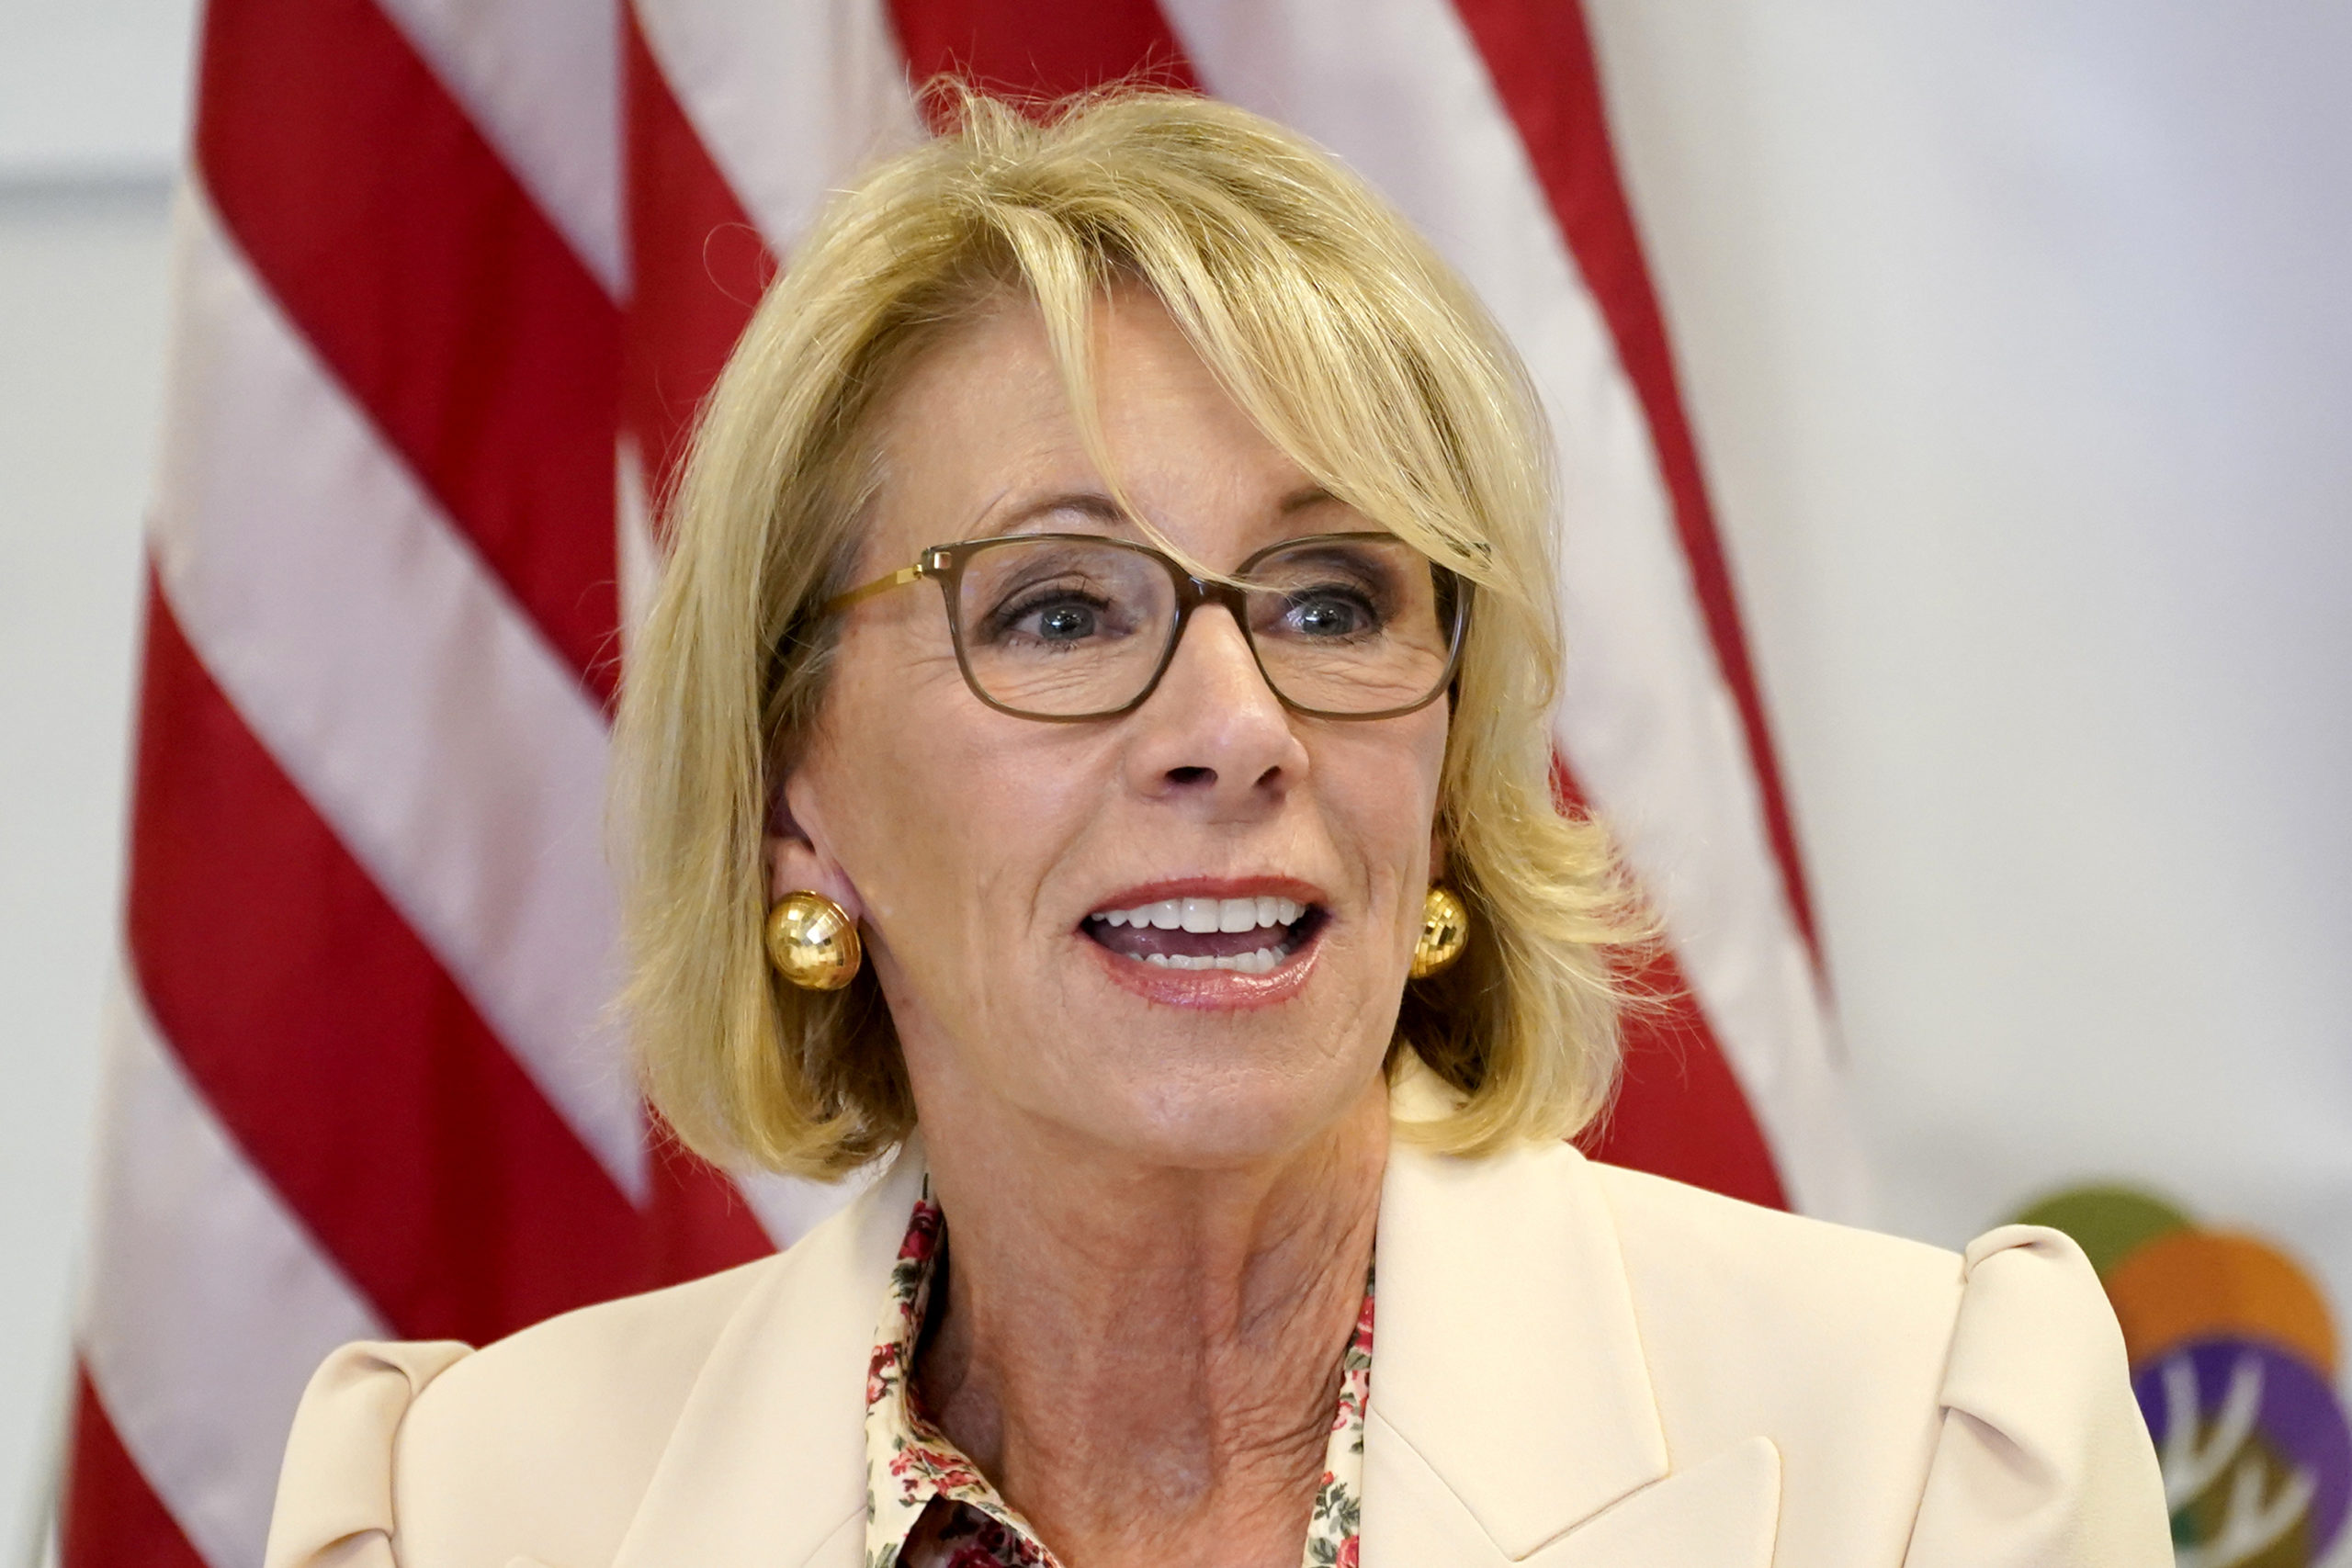 In this Oct. 15, 2020, file photo, Secretary of Education Betsy DeVos speaks at the Phoenix International Academy in Phoenix.